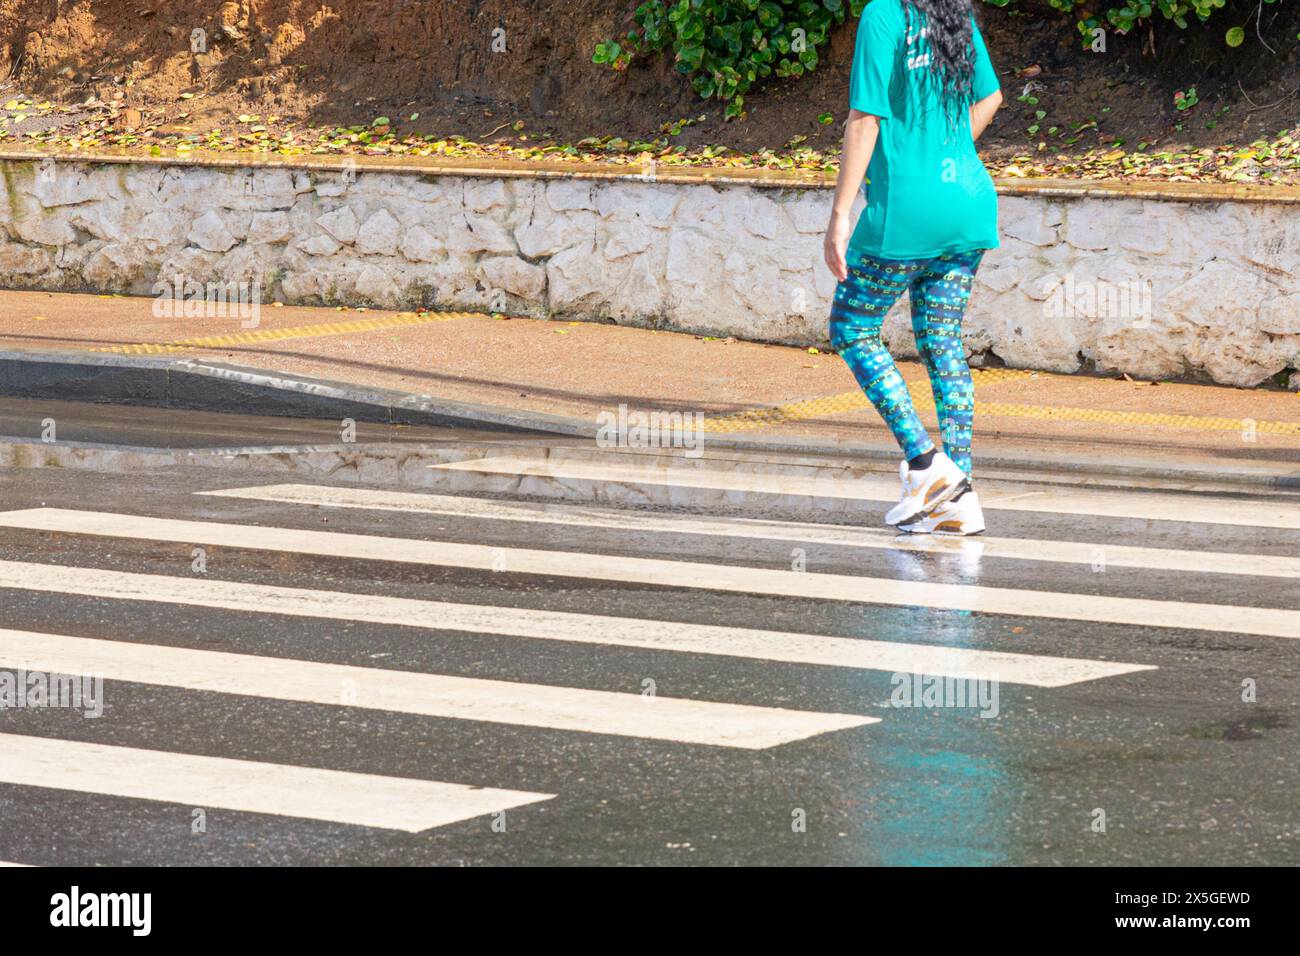 Salvador, Bahia, Brazil - September 15, 2019: An athlete is seen walking during a running competition in the city of Salvador, Bahia. Stock Photo